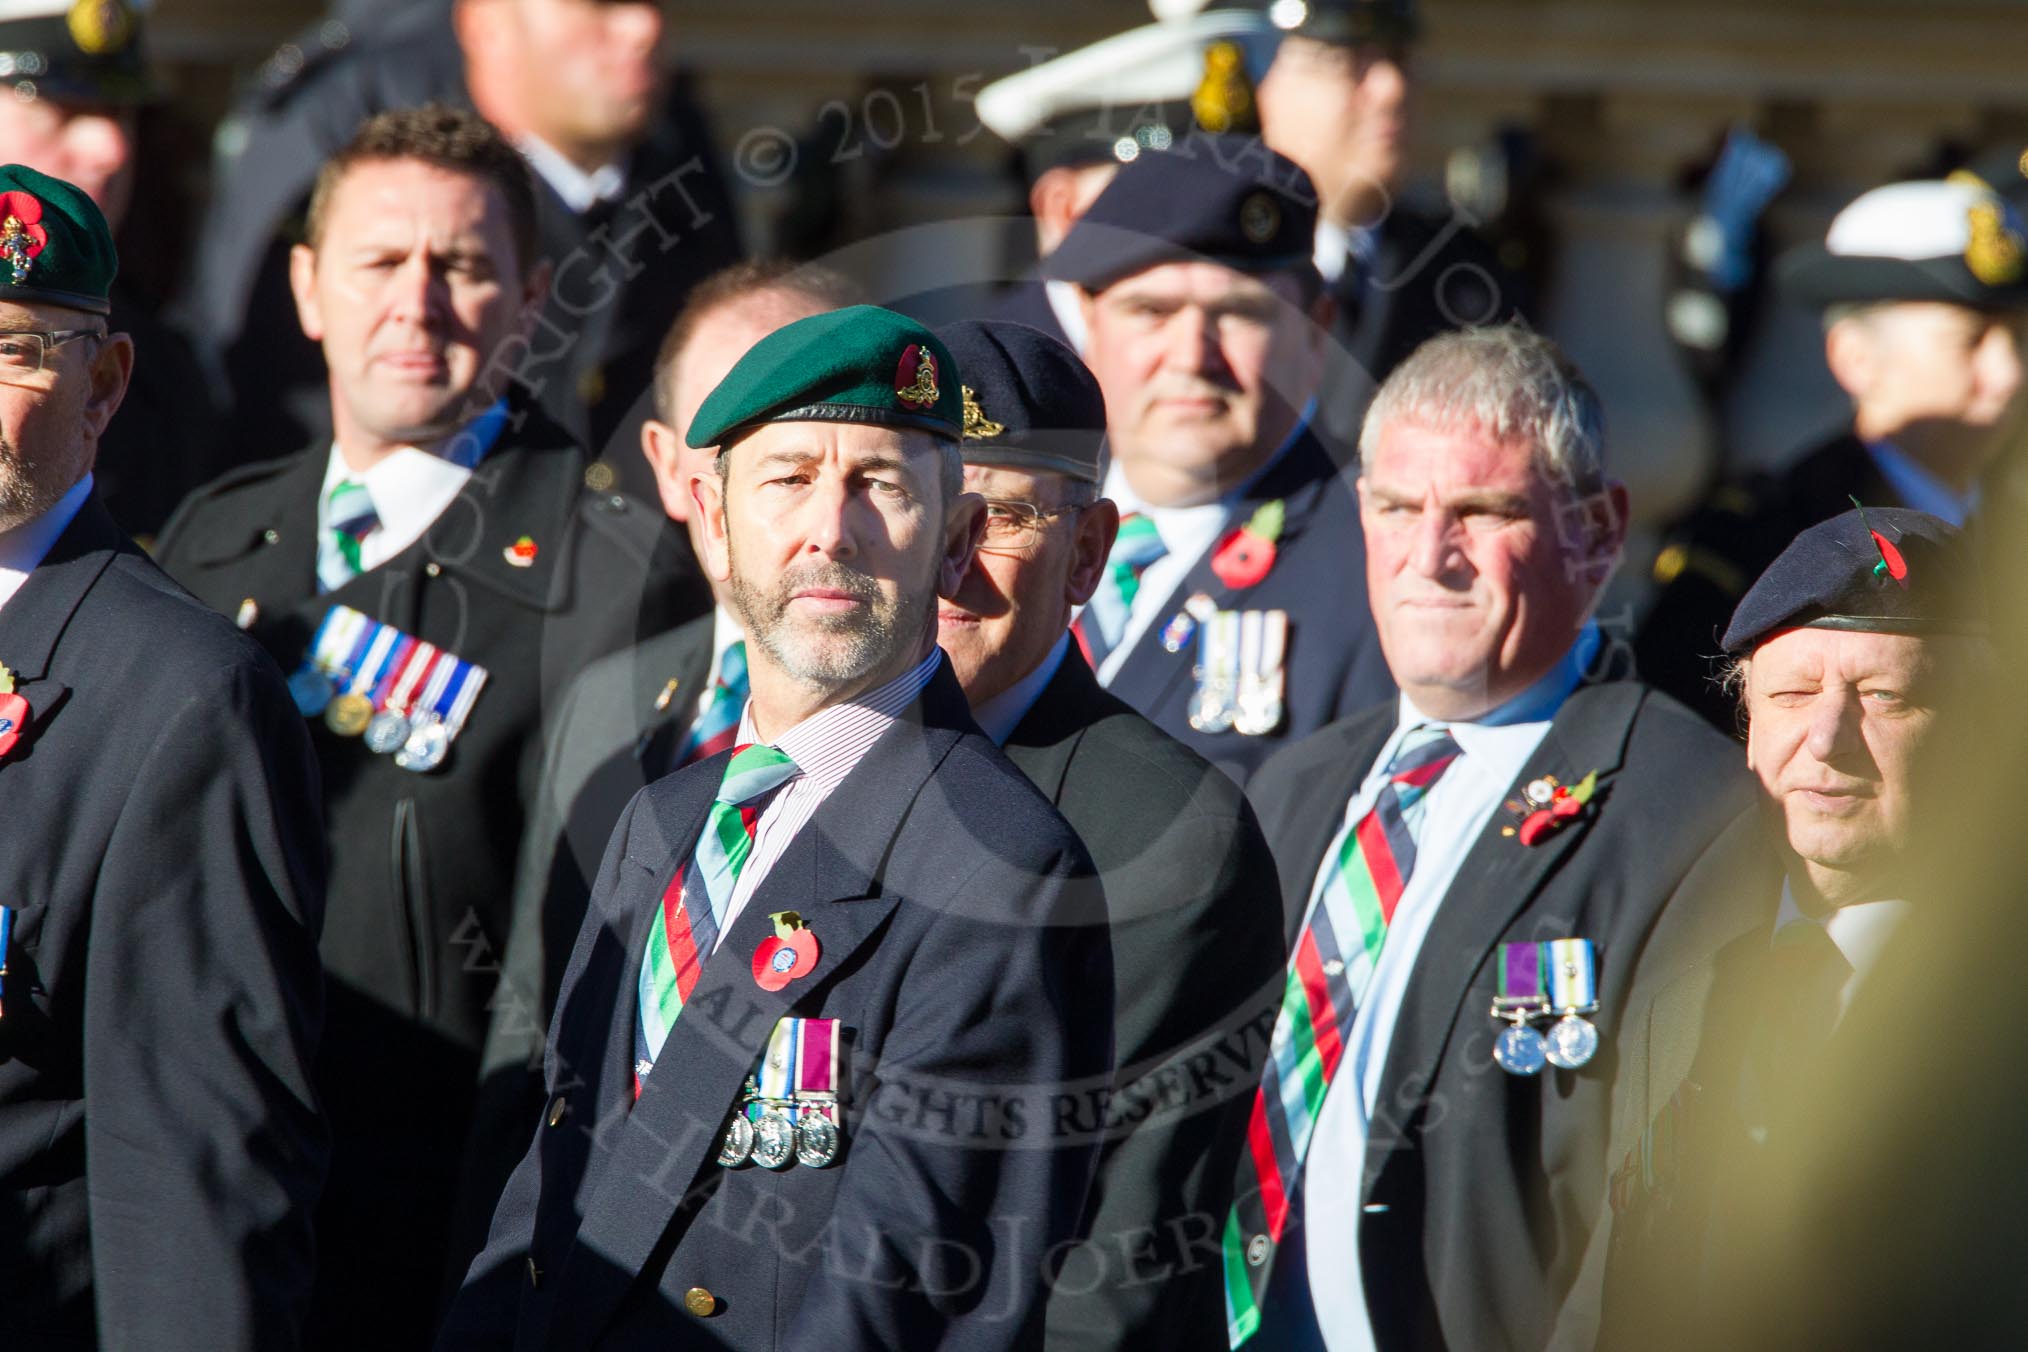 Remembrance Sunday Cenotaph March Past 2013: D23 - South Atlantic Medal Association (SAMA 82): The South Atlantic Medal (1982) is the official name of the medal awarded to almost 30,000 service men and women - and civilians - who took part in the campaign to liberate the Falkland Islands in 1982. The South Atlantic Medal Association is their Association..
Press stand opposite the Foreign Office building, Whitehall, London SW1,
London,
Greater London,
United Kingdom,
on 10 November 2013 at 11:41, image #182